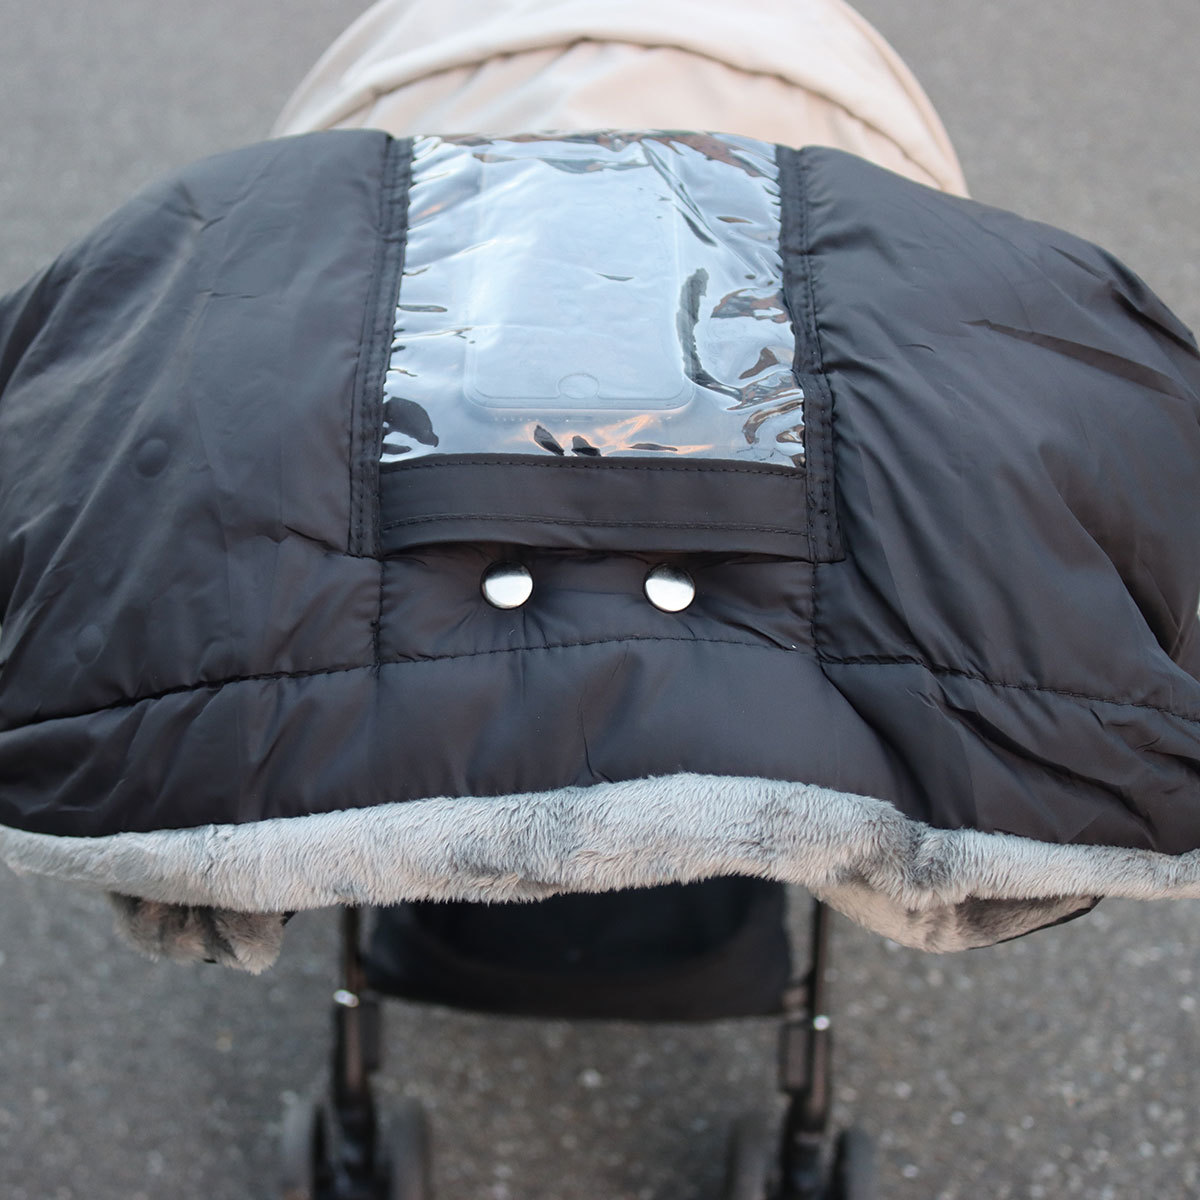  stroller for gloves hand muff stroller Cart gloves warm muff fleece protection against cold measures protection against cold goods mitten black gray 